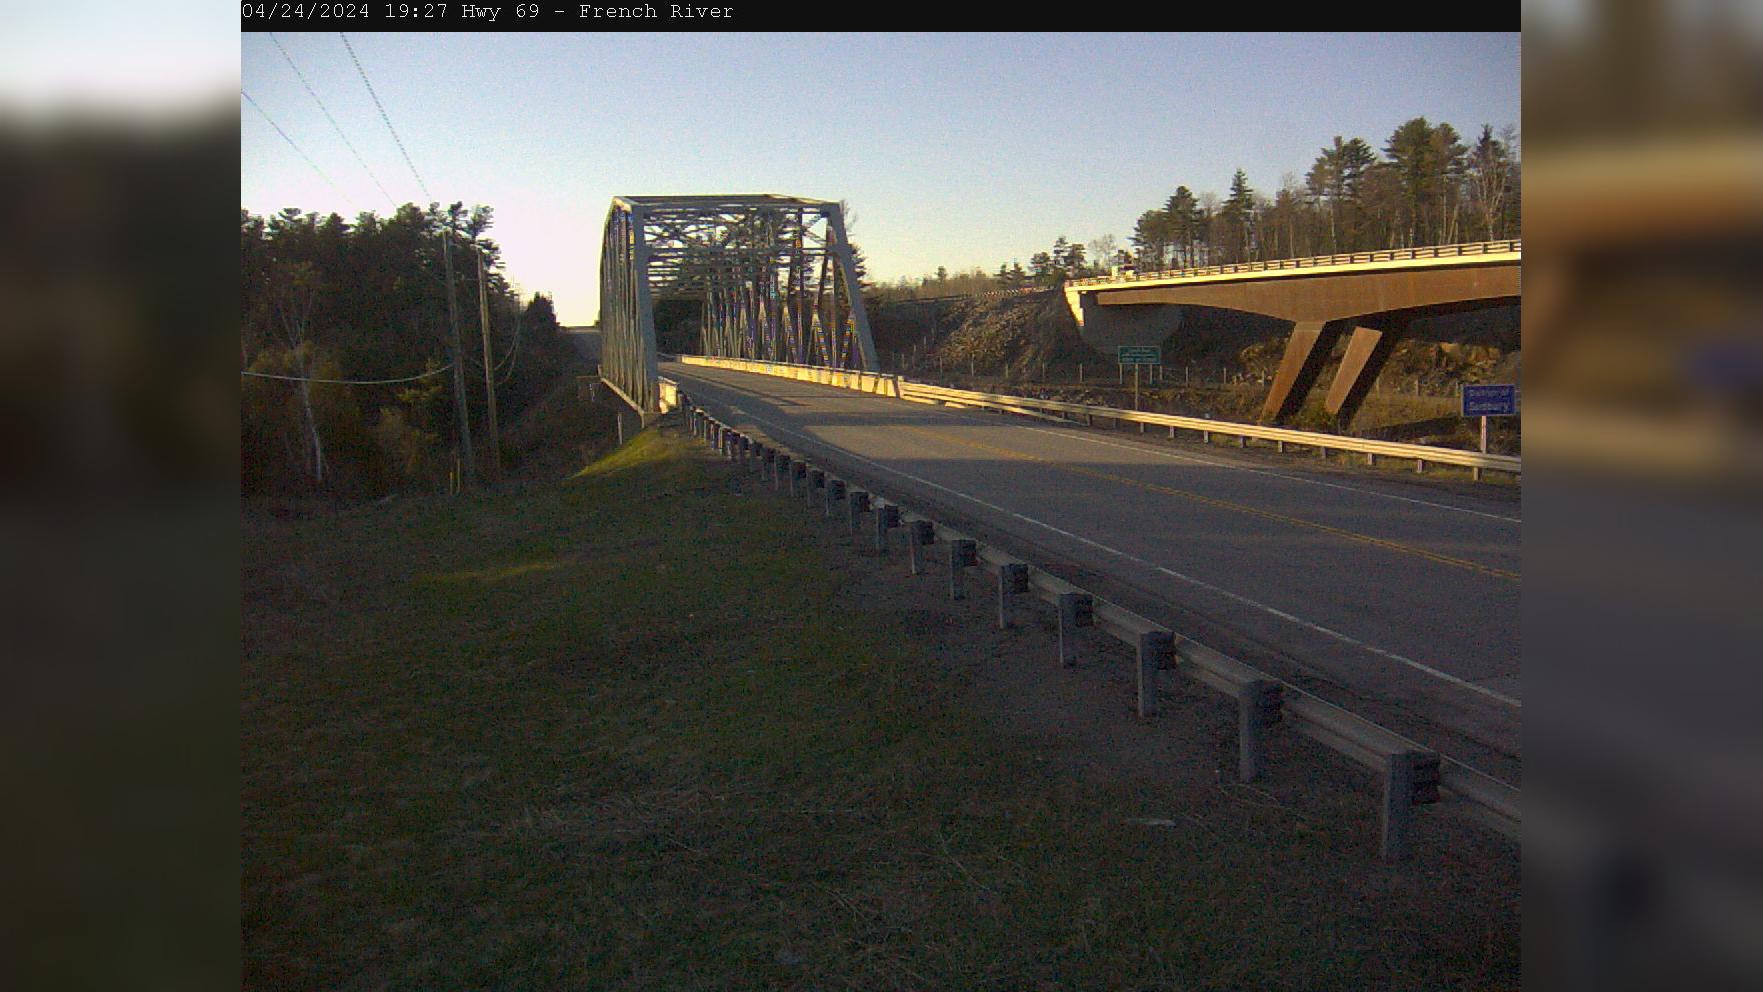 Traffic Cam Unorganized Centre Parry Sound: Highway 69 near French River Br Player